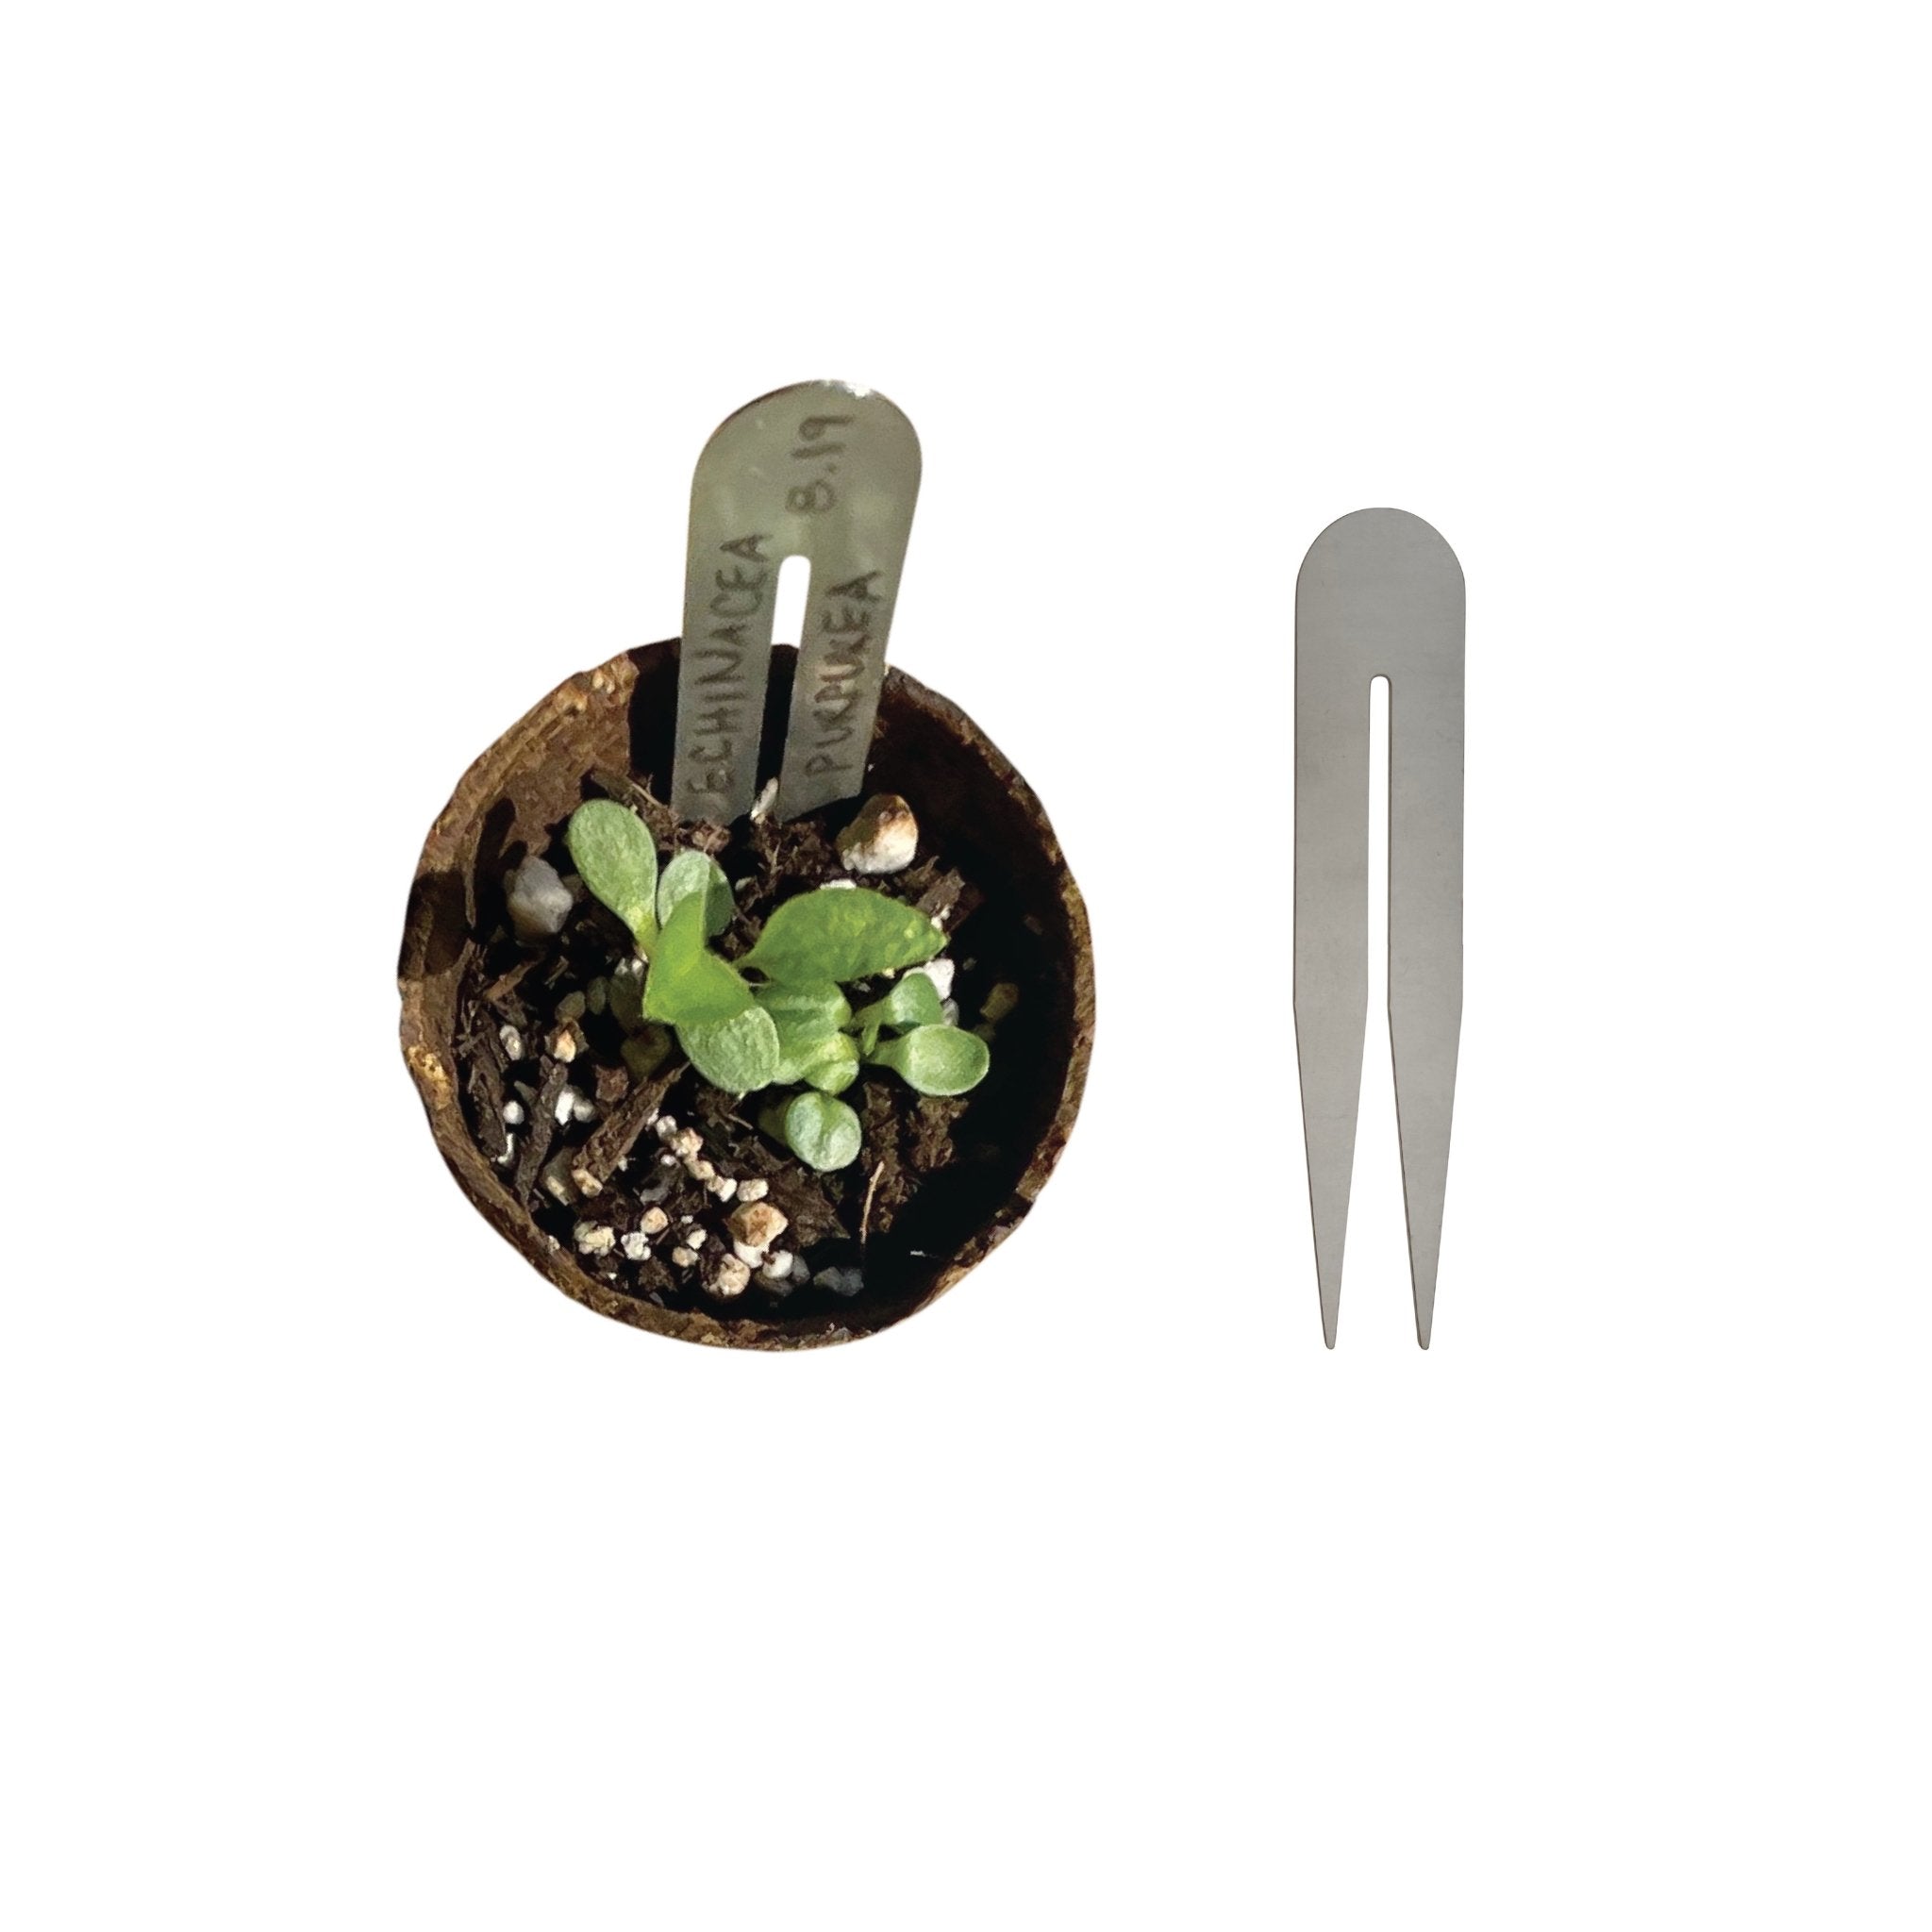 PLANT ARCH TAGS - SECONDS SALE - RT1home